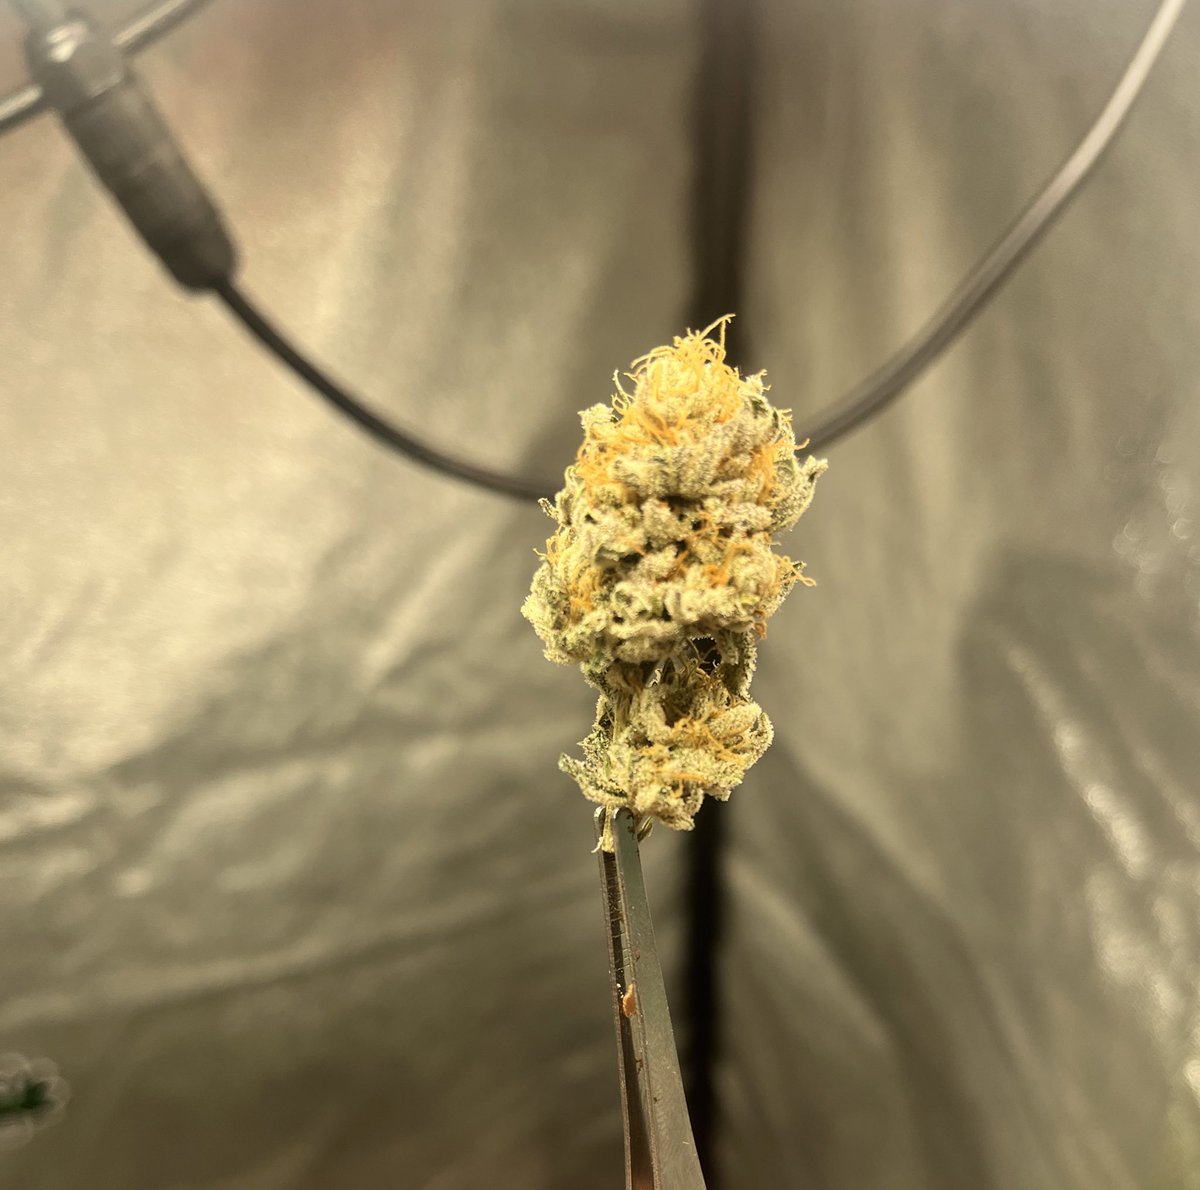 Chopped a little test branch of last week of the purple stardawg. #Mmemberville #CannabisCommunity #CannaLand #cannabisculture #420community #growyourown #cannabisgrower